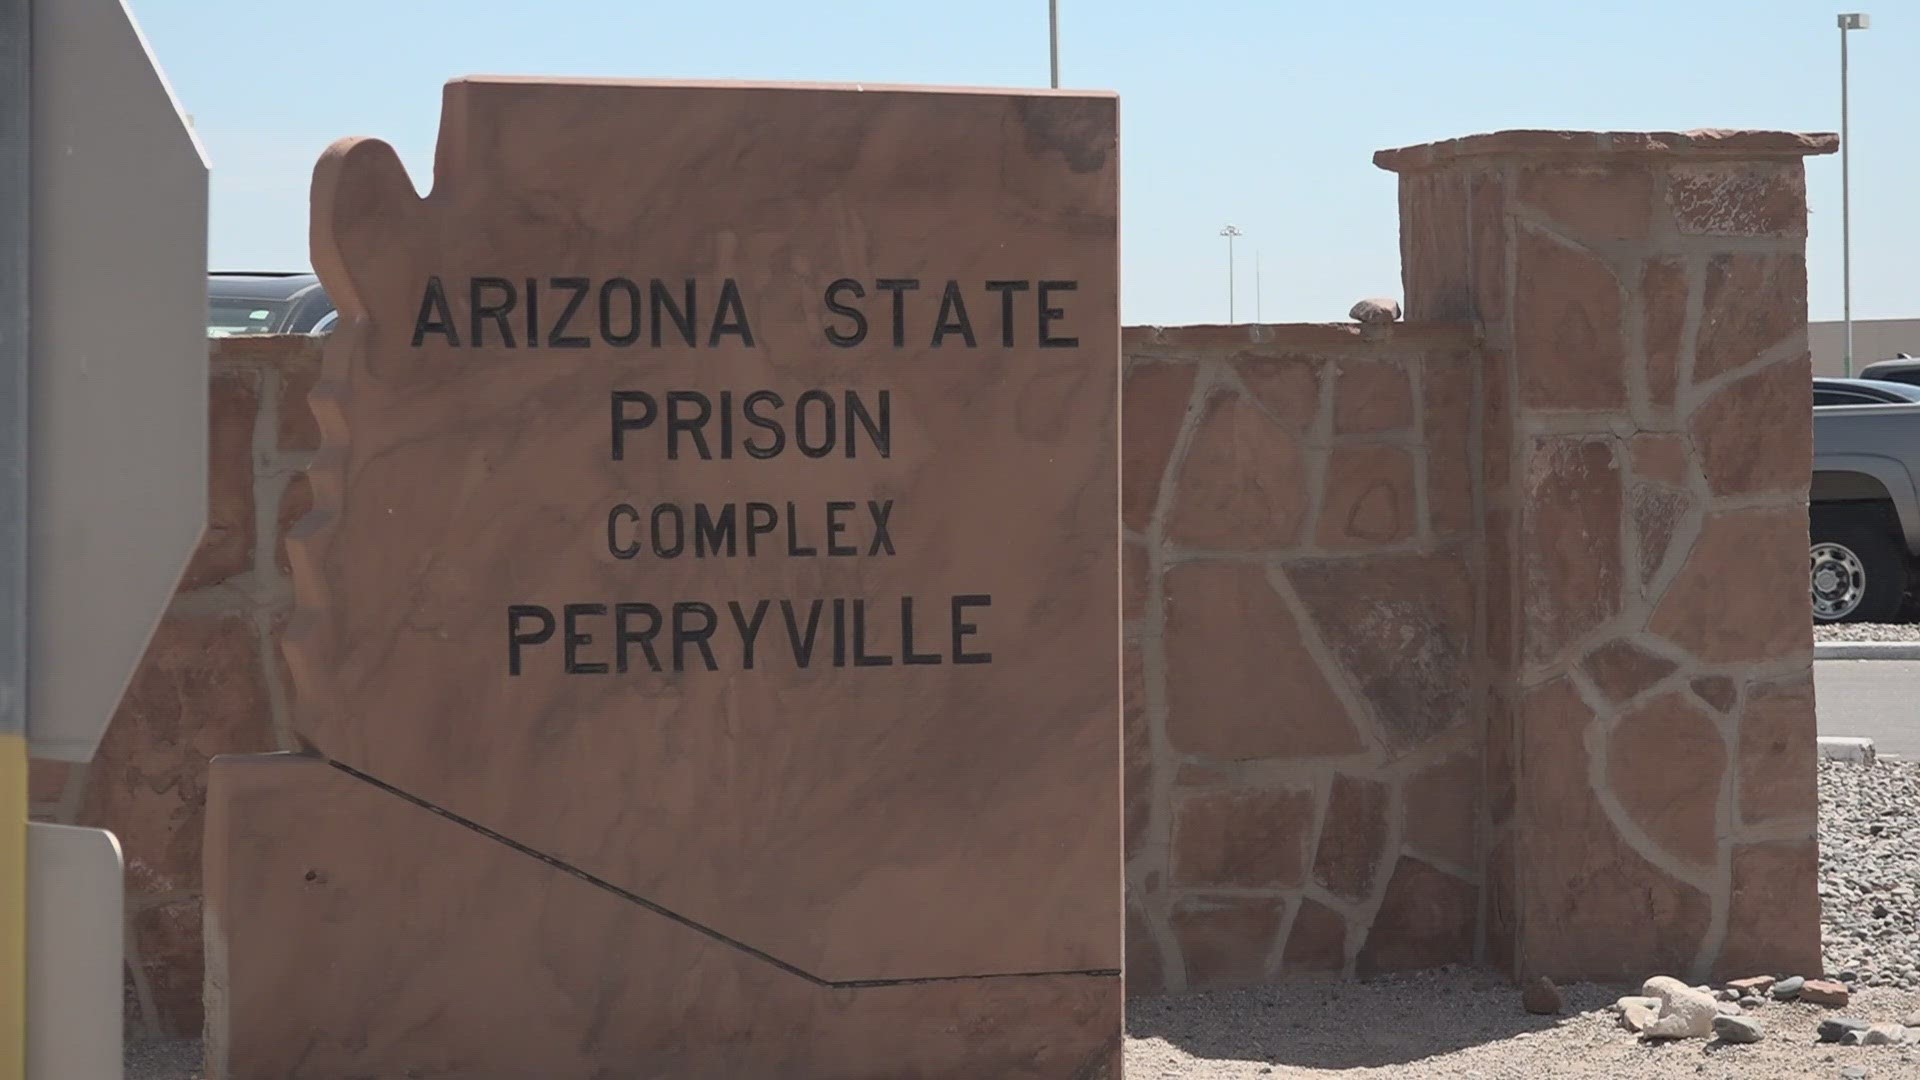 12News has sent numerous requests for information from Perryville Prison that have yet to be fulfilled.